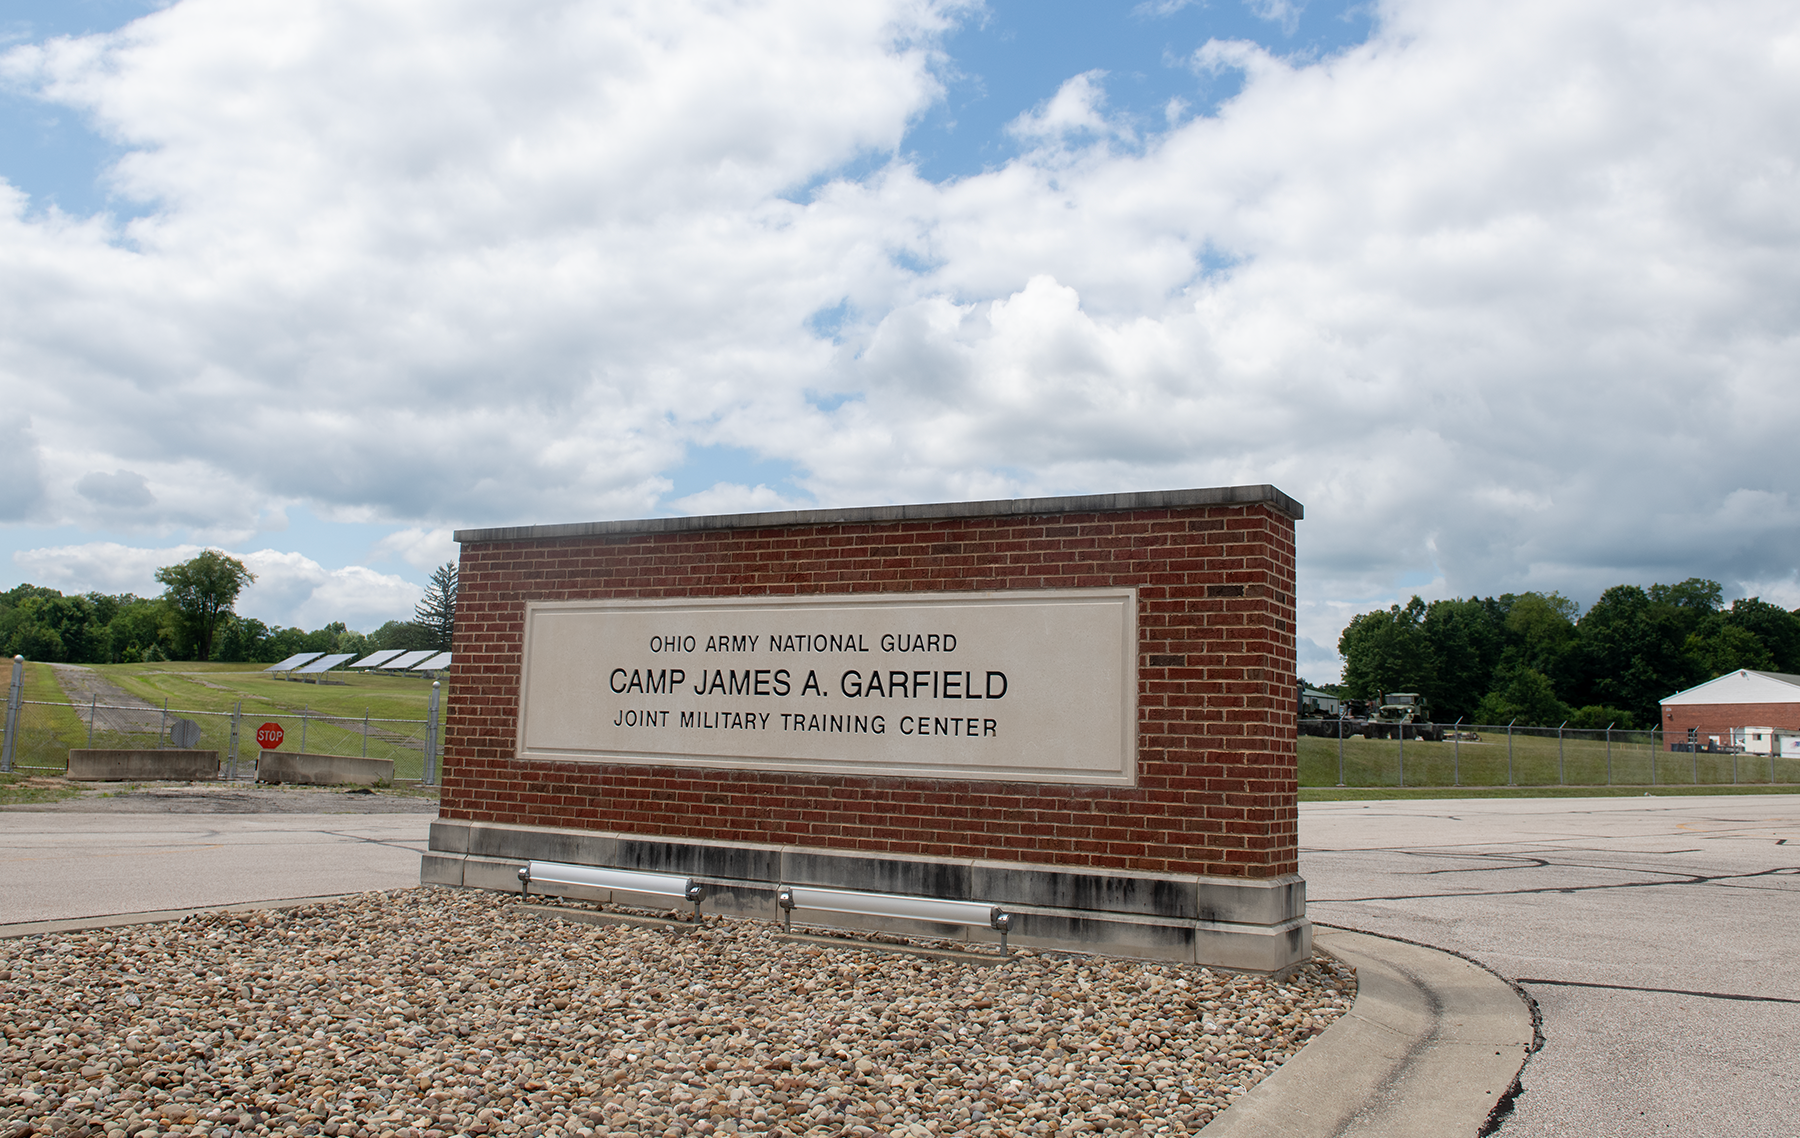 Nine days of training with explosives and grenades set for Camp Garfield starting Thursday